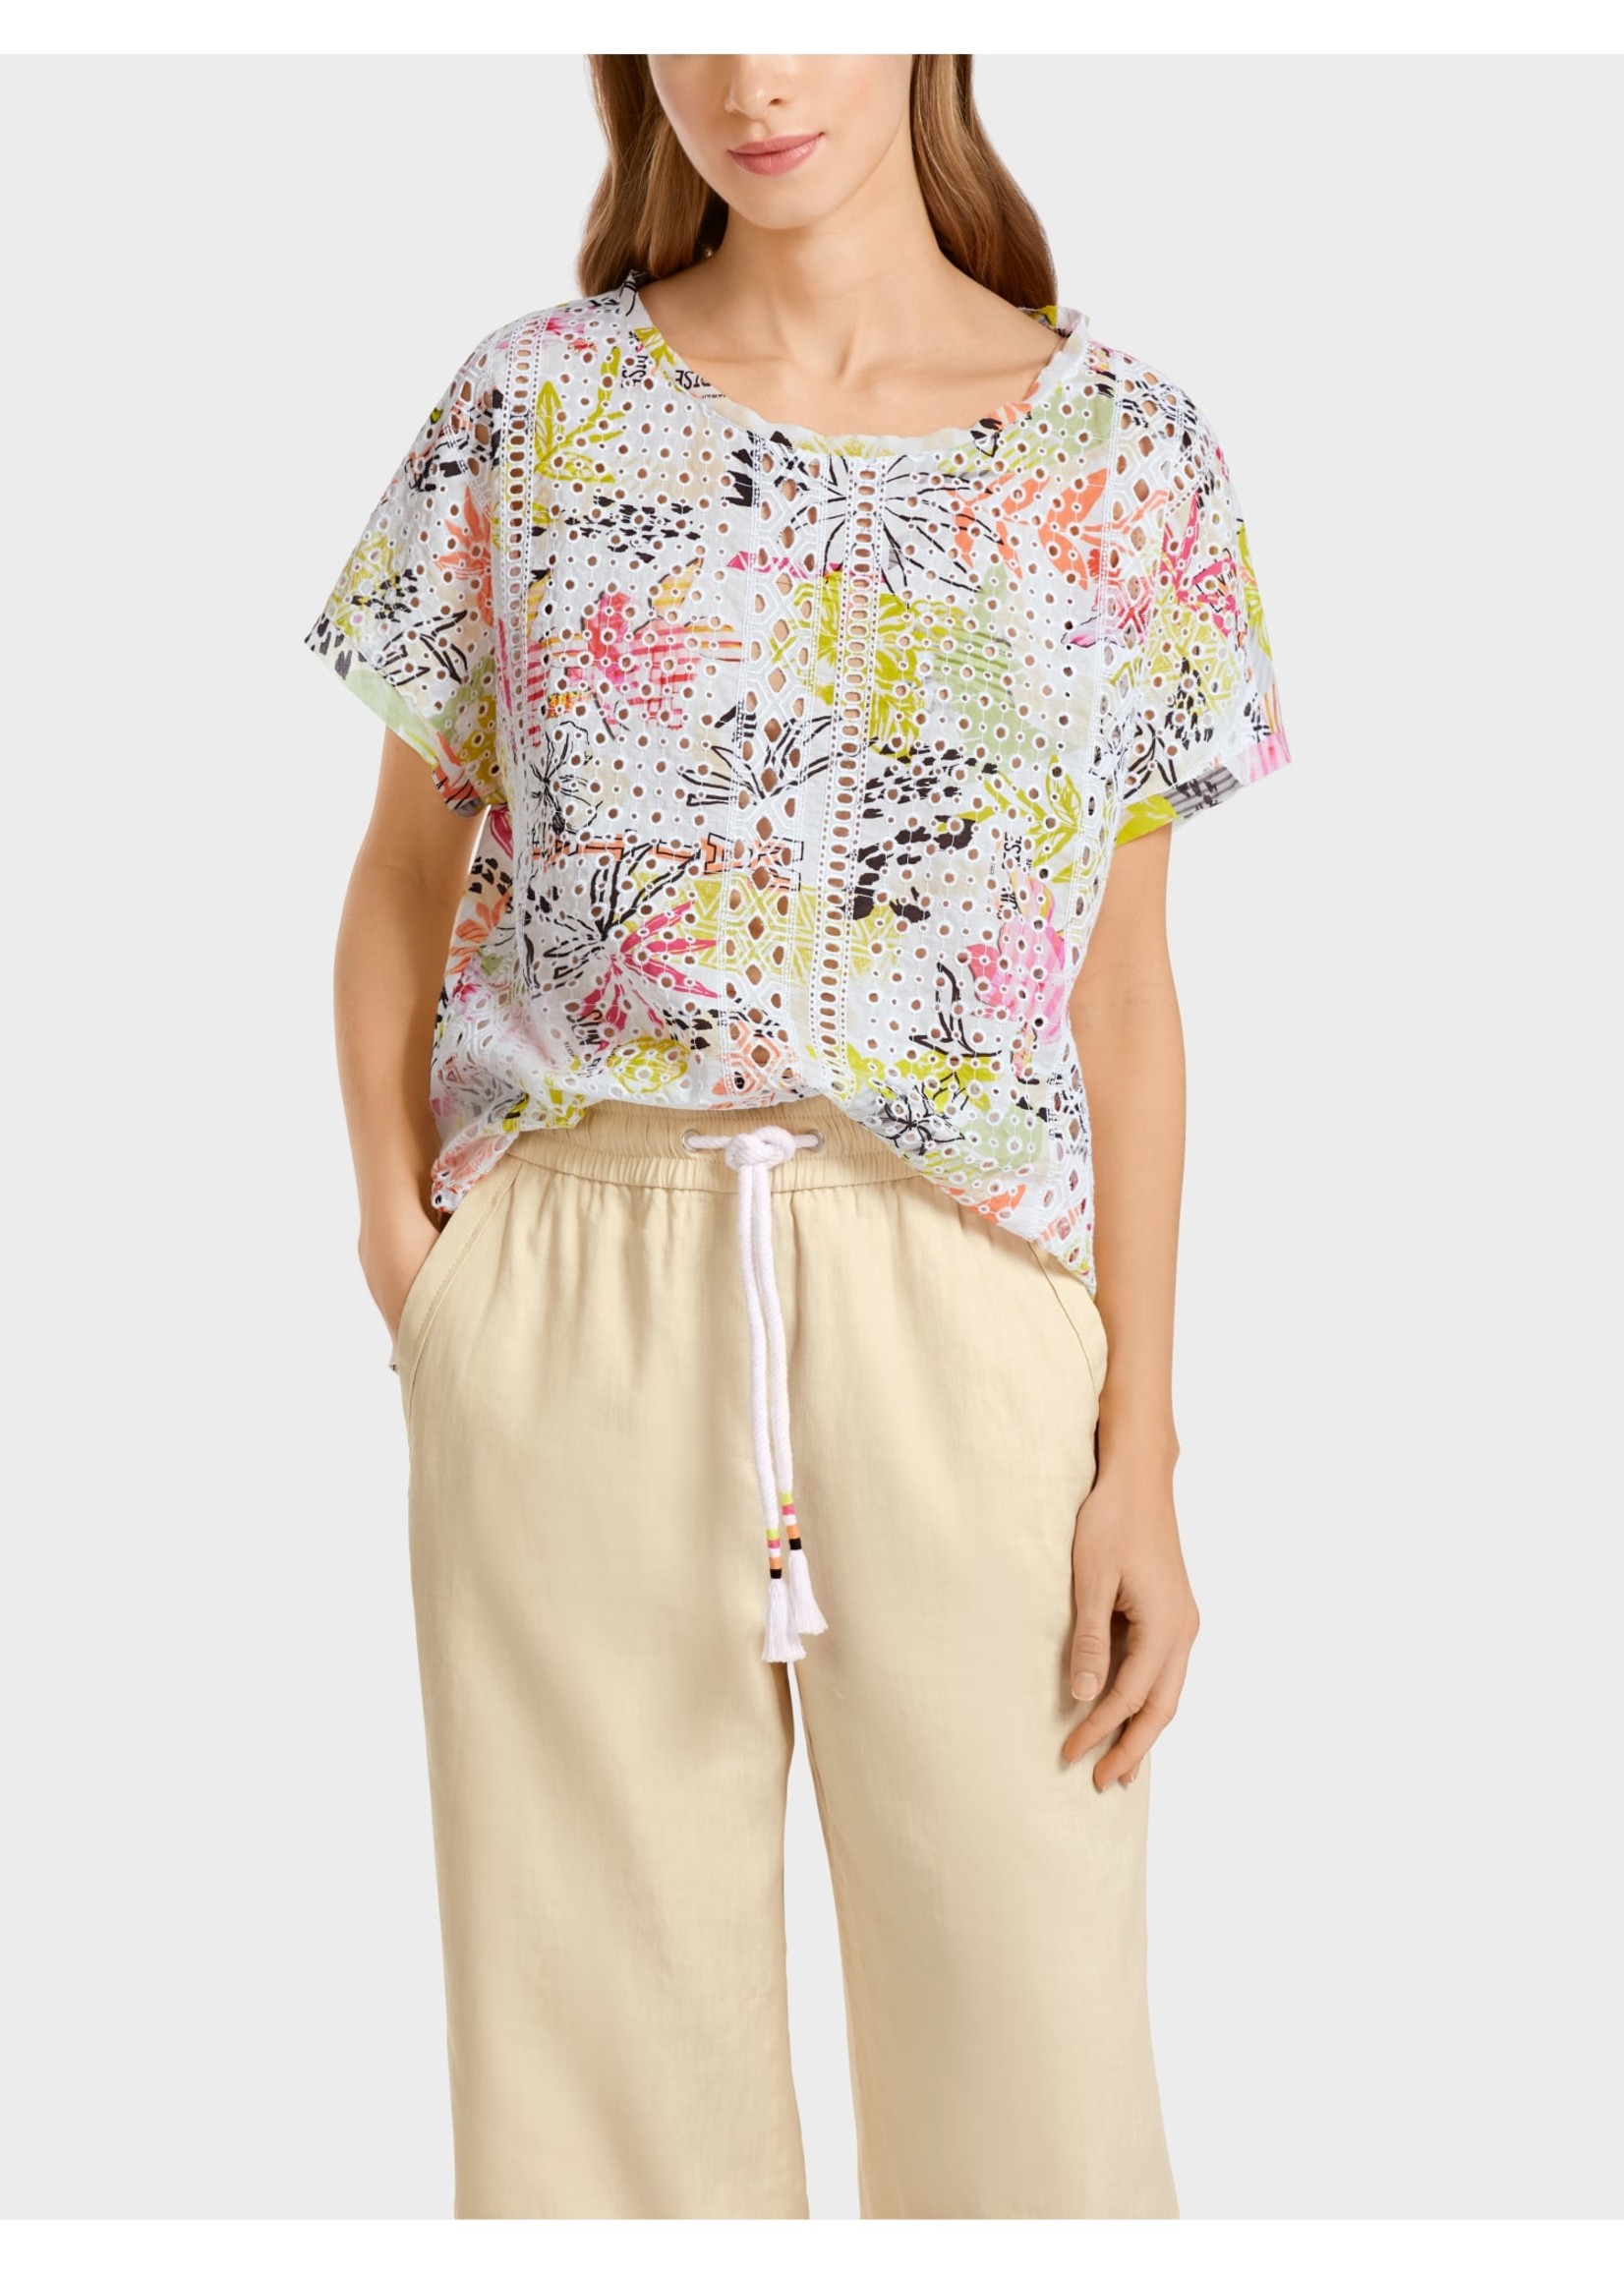 Marccain Sports Blouse US 51.26 W69 428